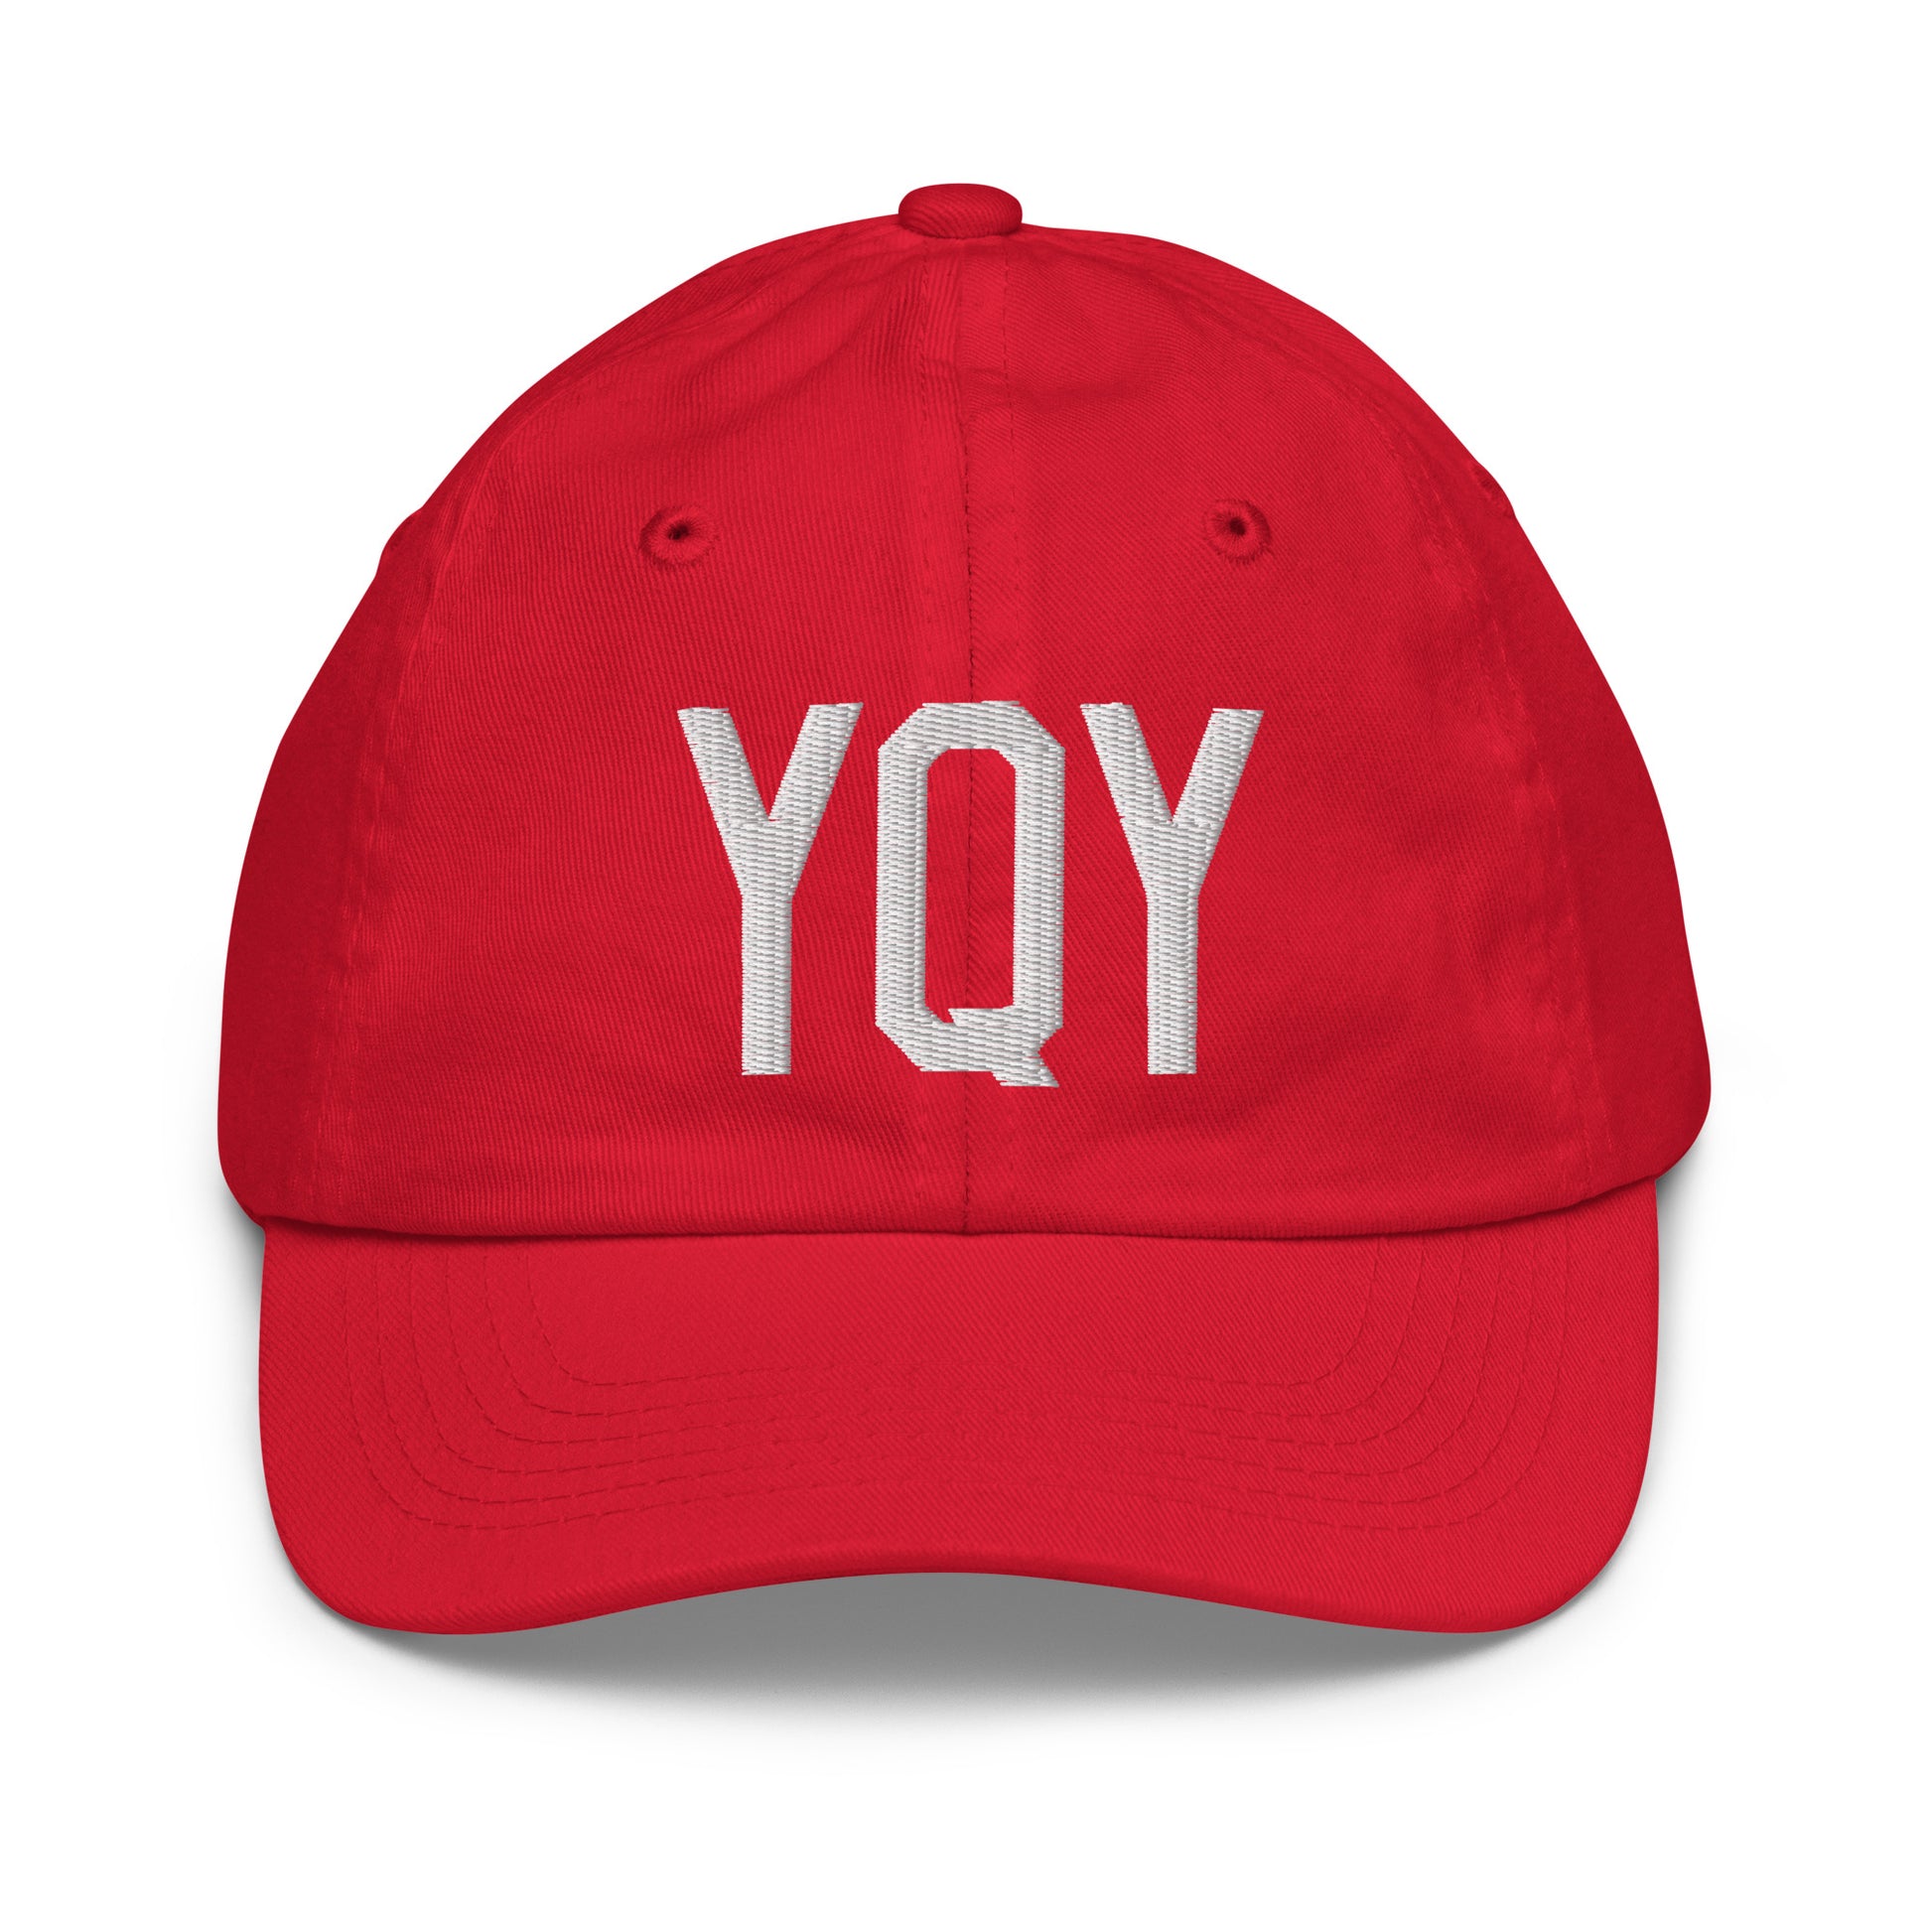 Airport Code Kid's Baseball Cap - White • YQY Sydney • YHM Designs - Image 17